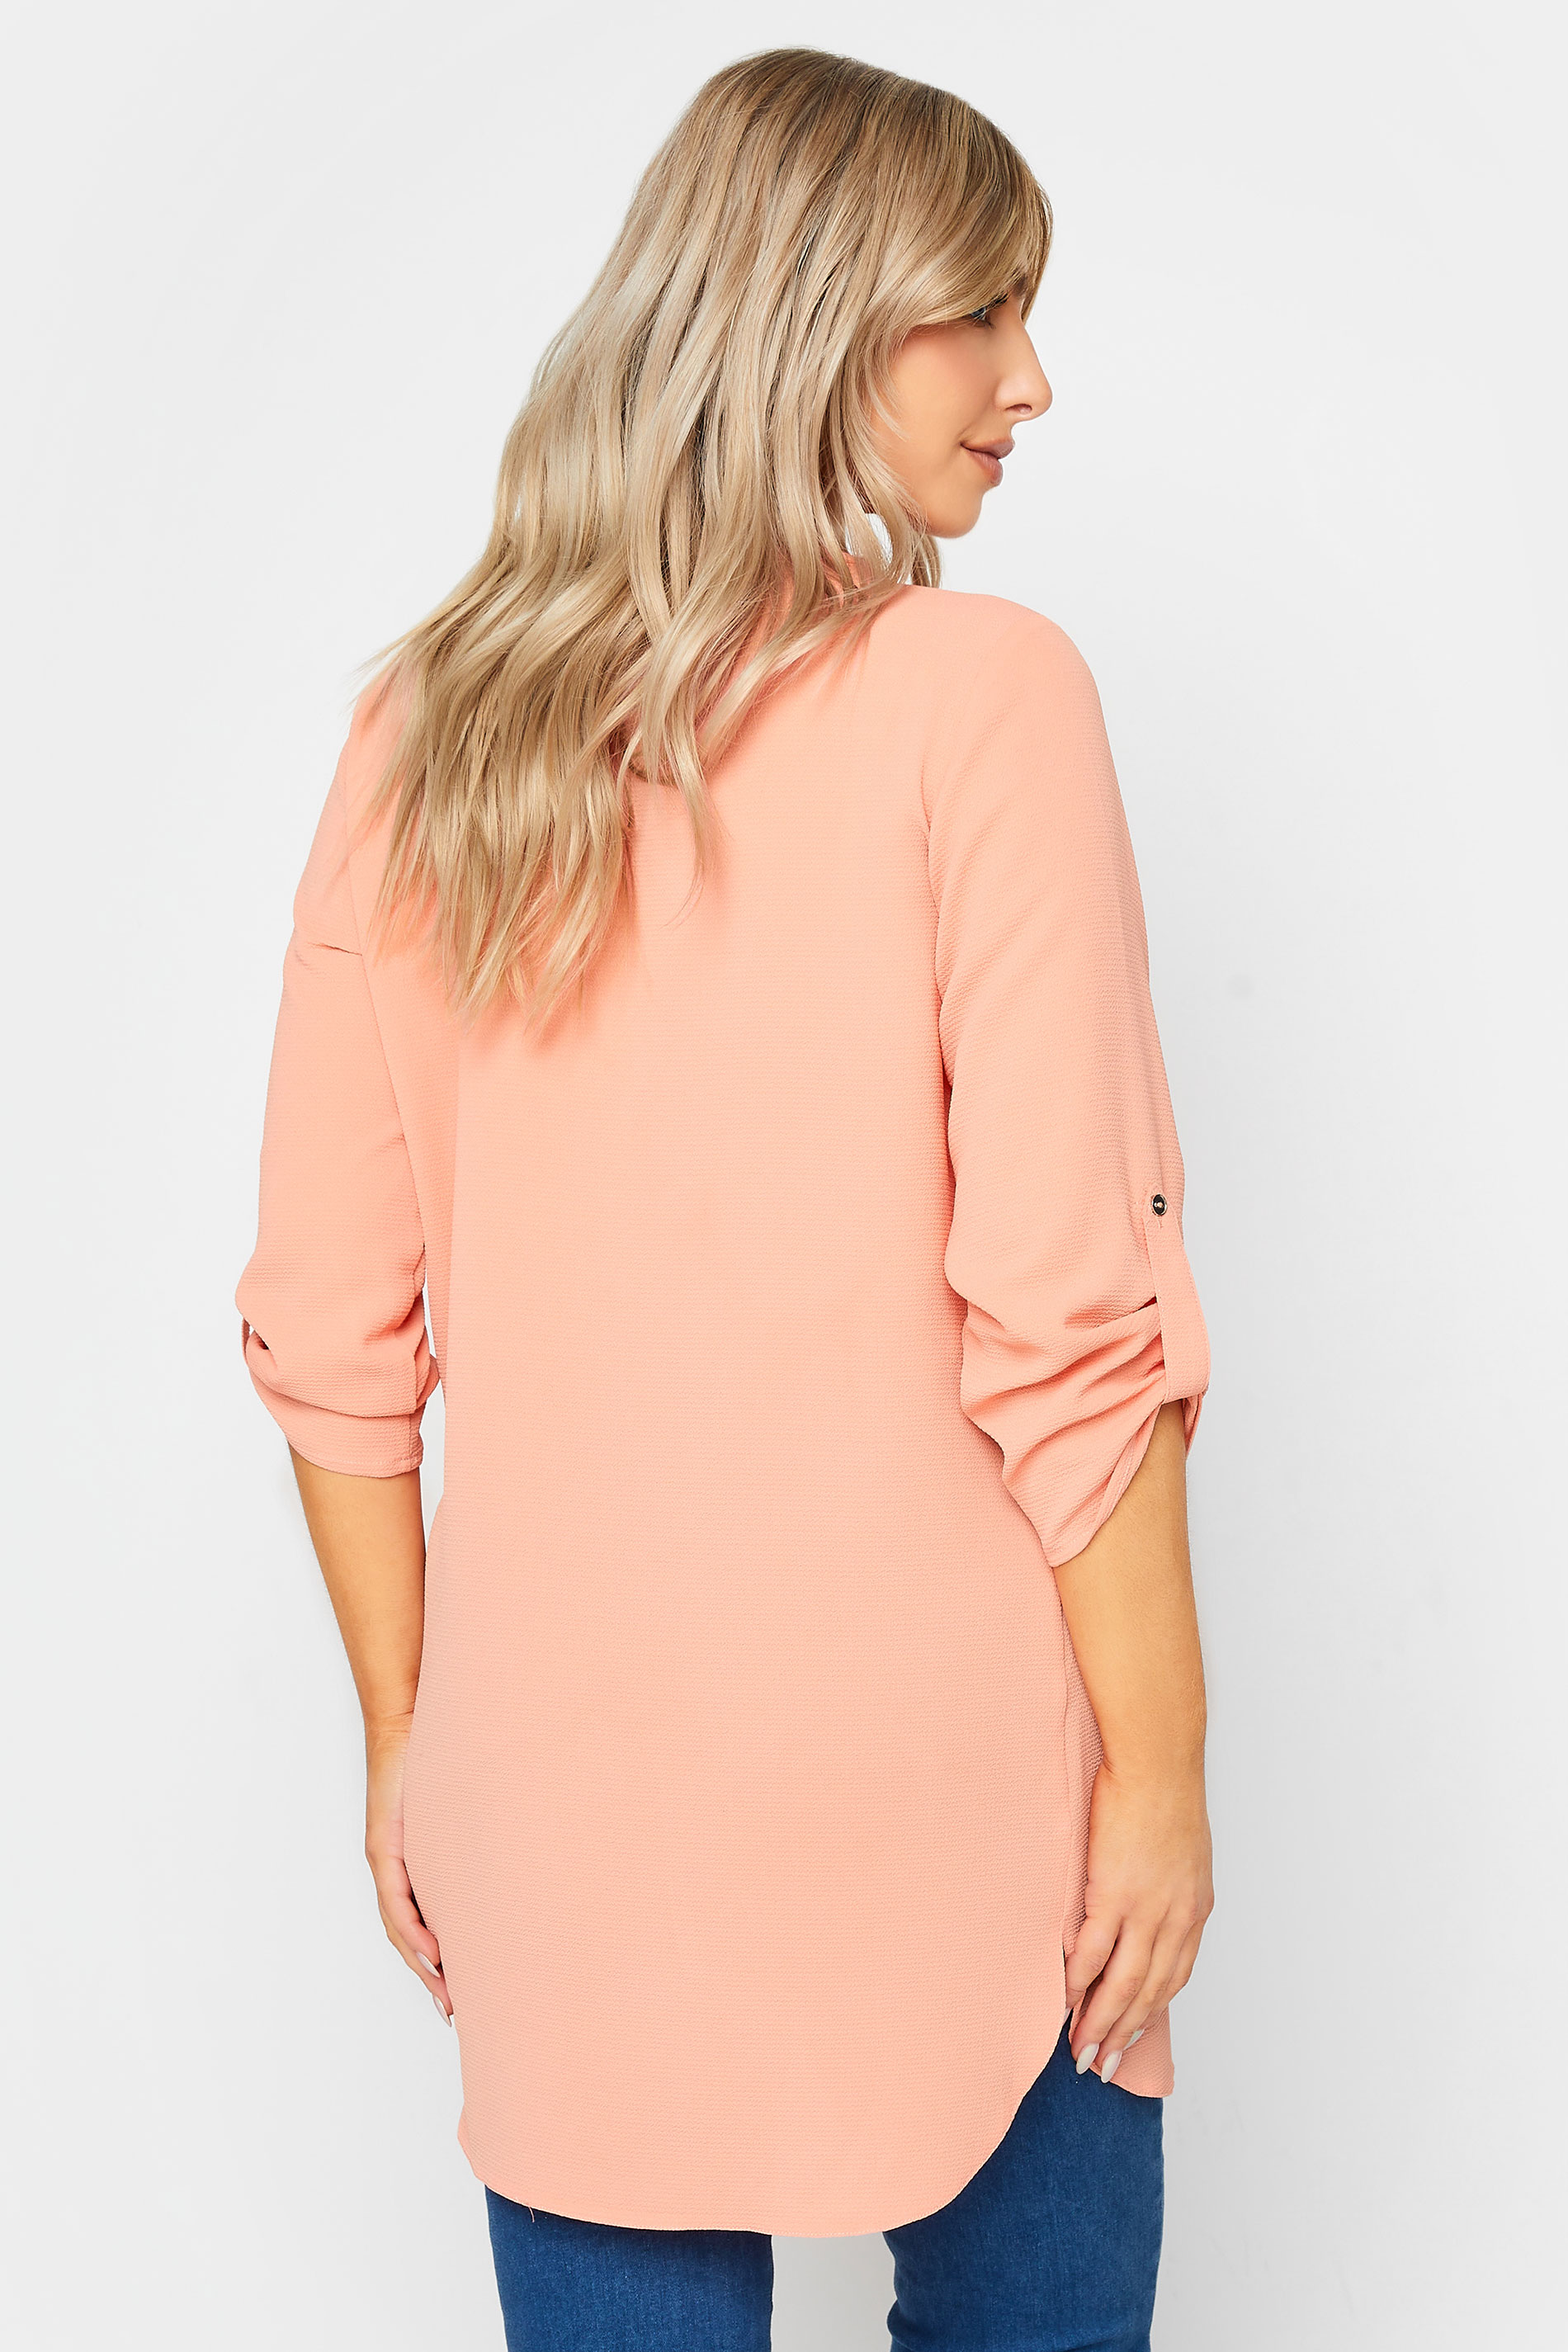 M&Co Pink Statement Button Tab Sleeve Shirt | M&Co 3